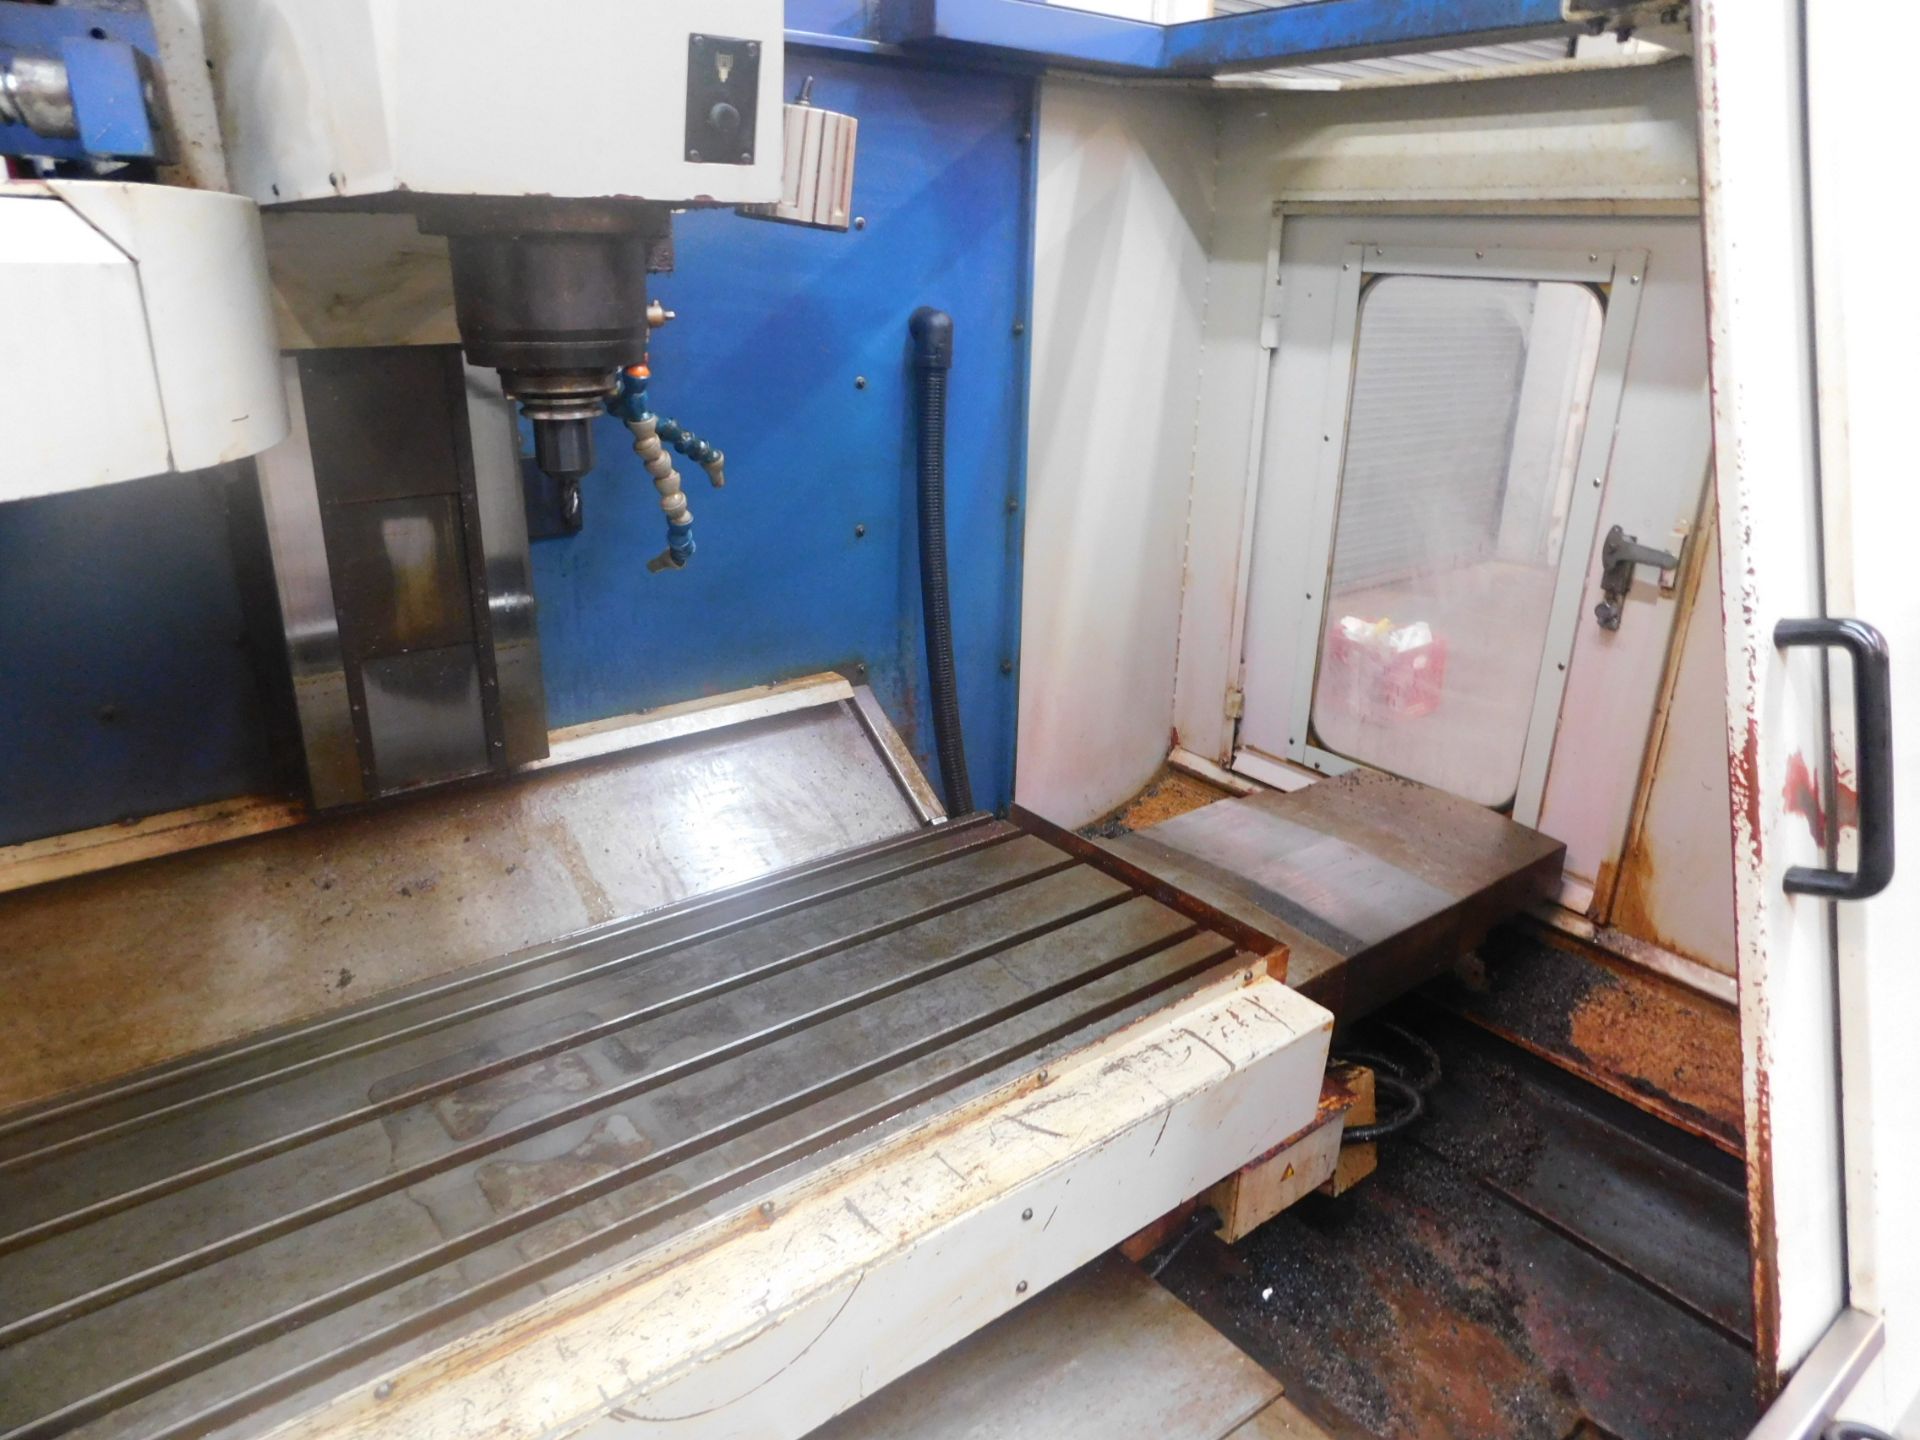 Mighty Viper Model V-950 Vertical Machining Center, SN 002167, New in 1999 with Mitsubishi Meldas 64 - Image 8 of 17